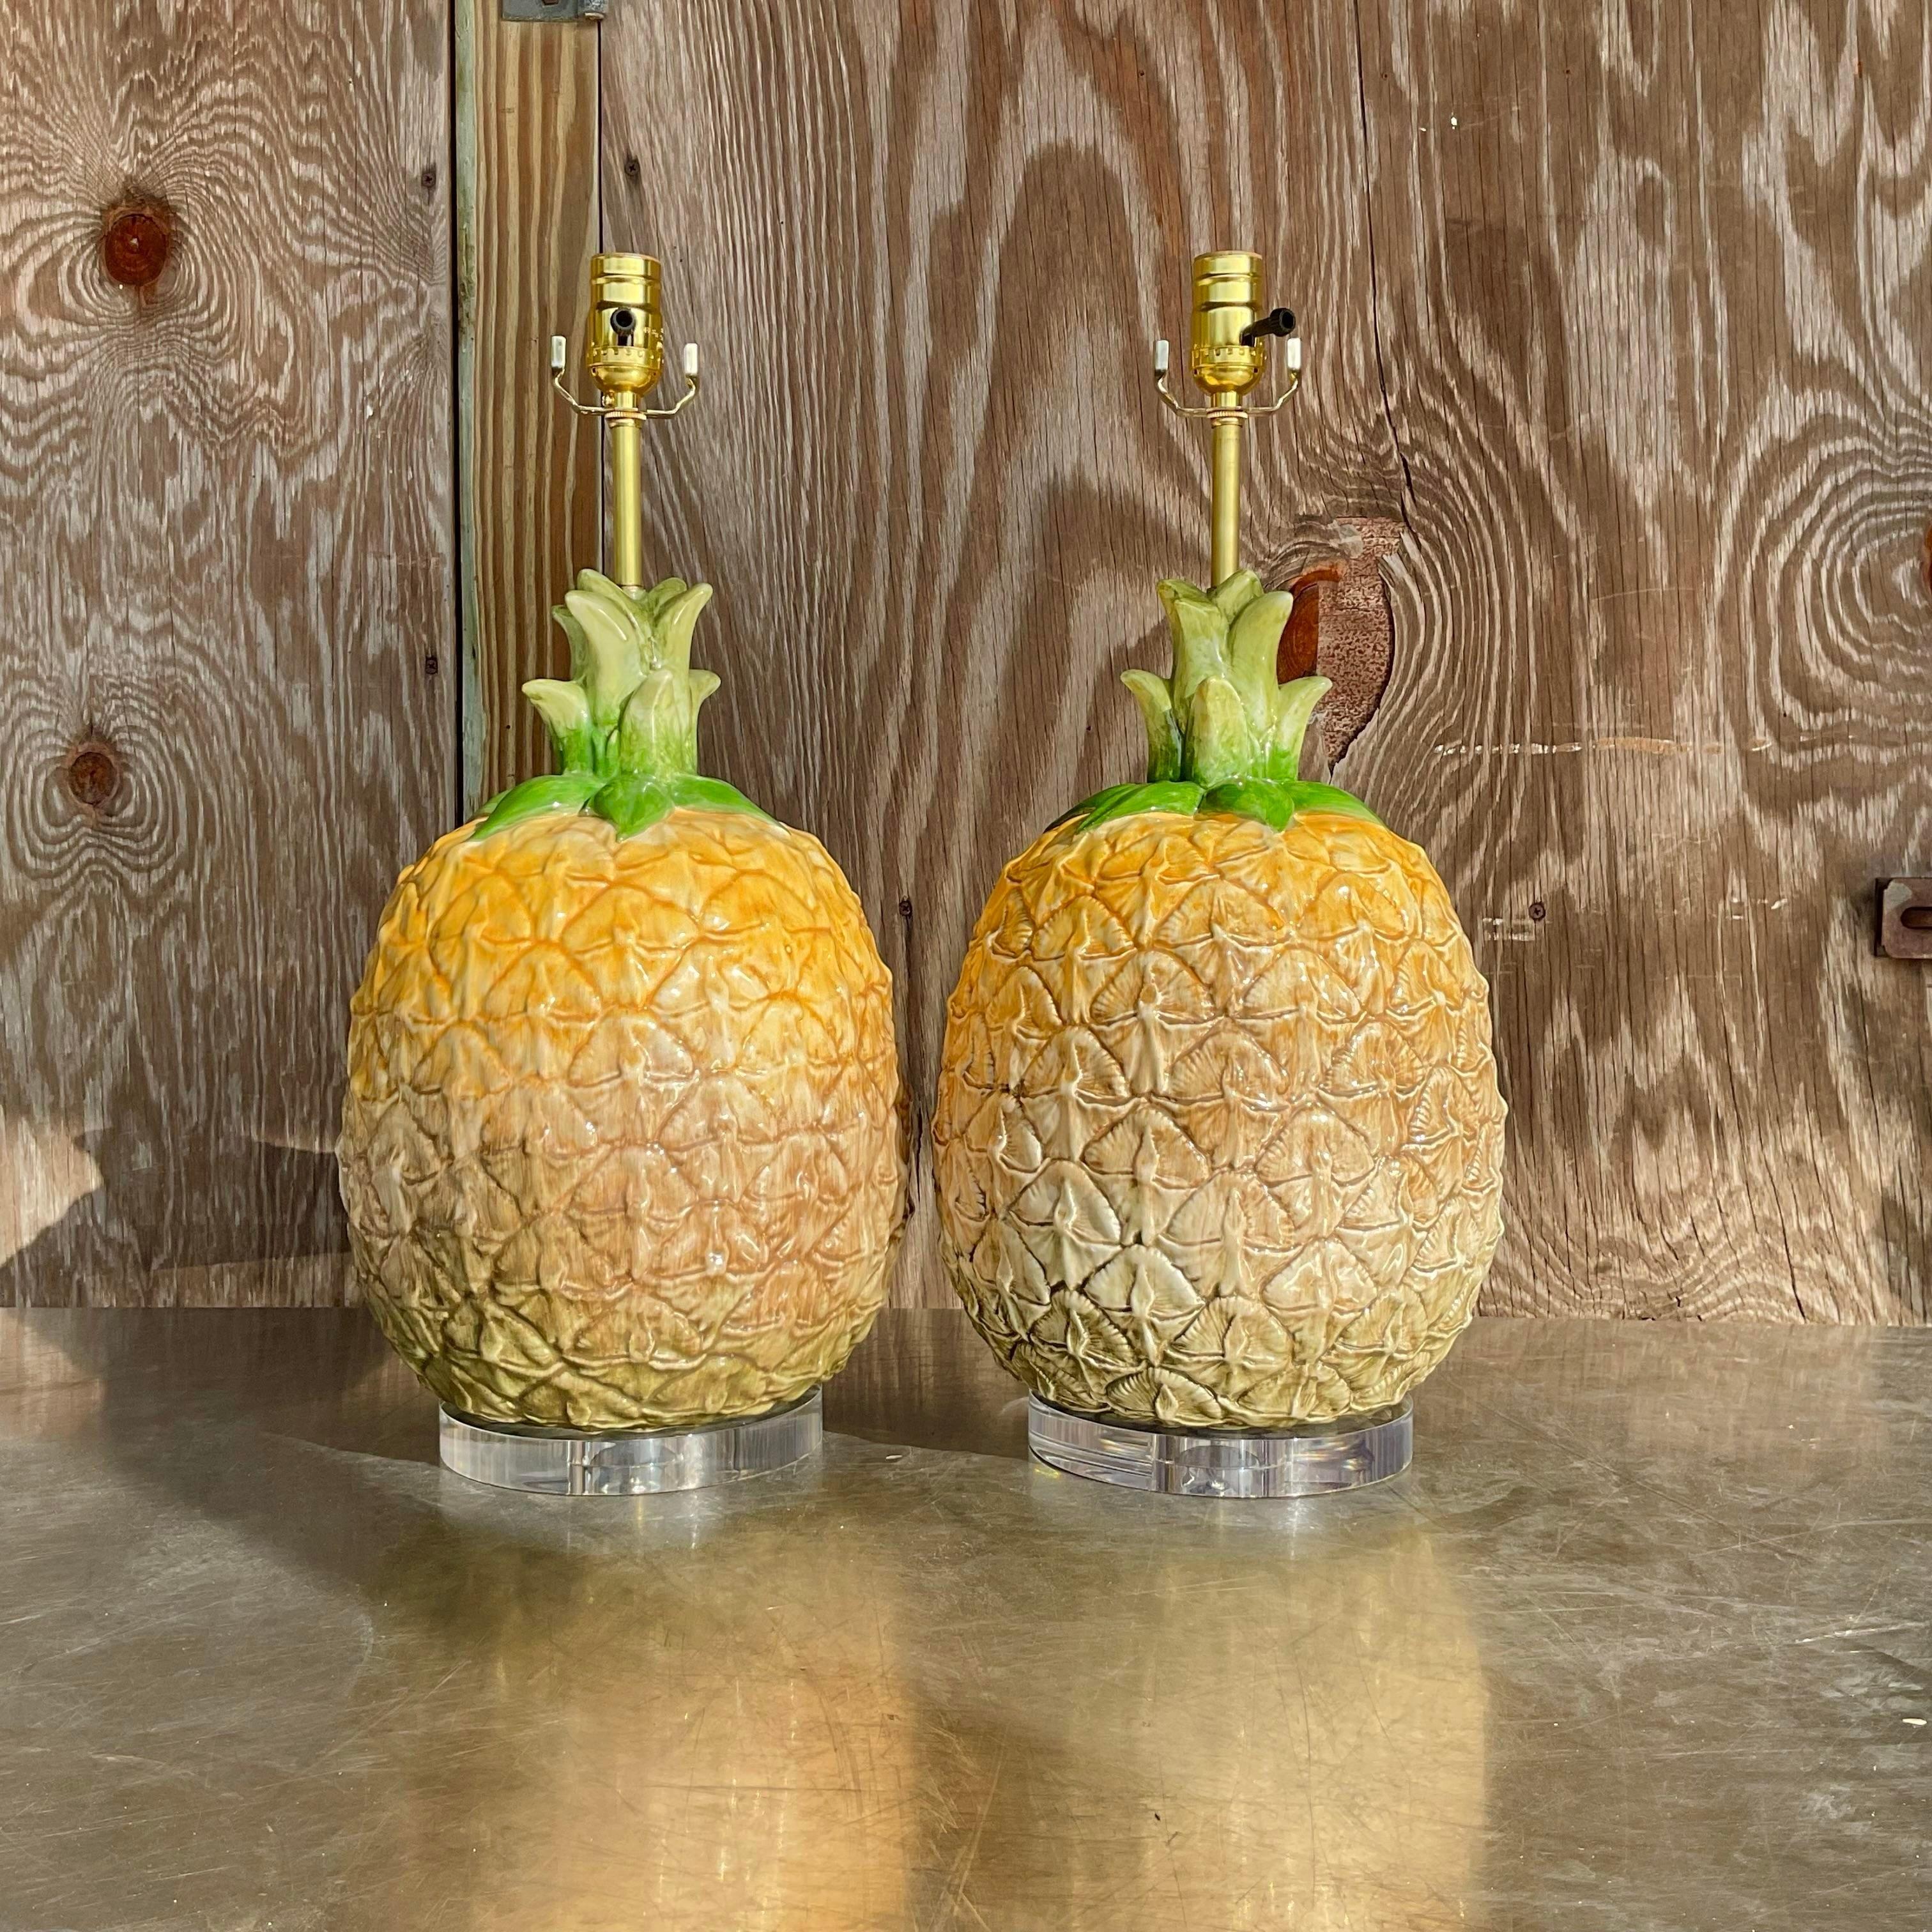 Epic vintage pair of ceramic pineapple lamps. Hand made and hand painted then adhered to a modern lucite base with brass neck and socket. Immediately add a sense of whimsy and playfulness to any coastal space. These lamps are able to maintain a